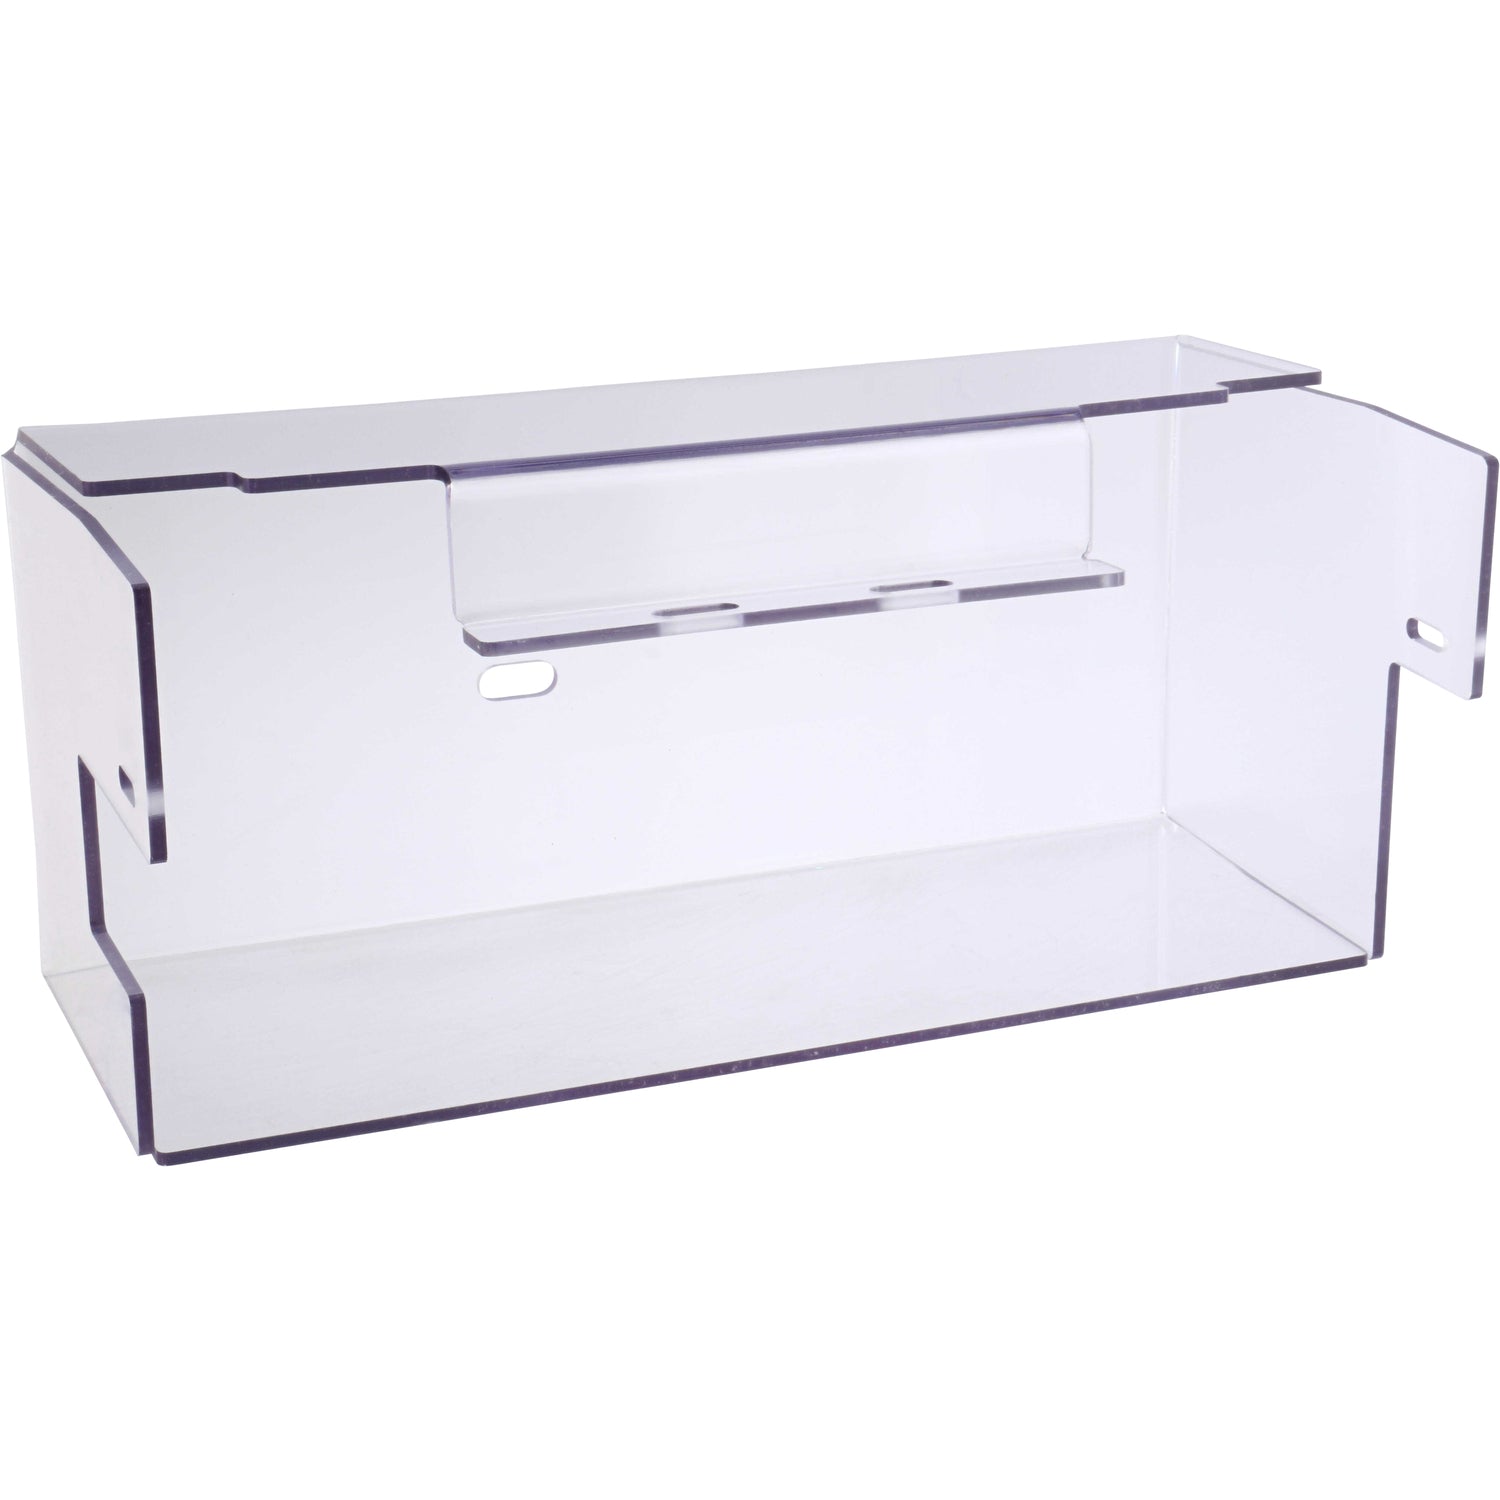 Clear bent polycarbonate guarding on a white background. S28A